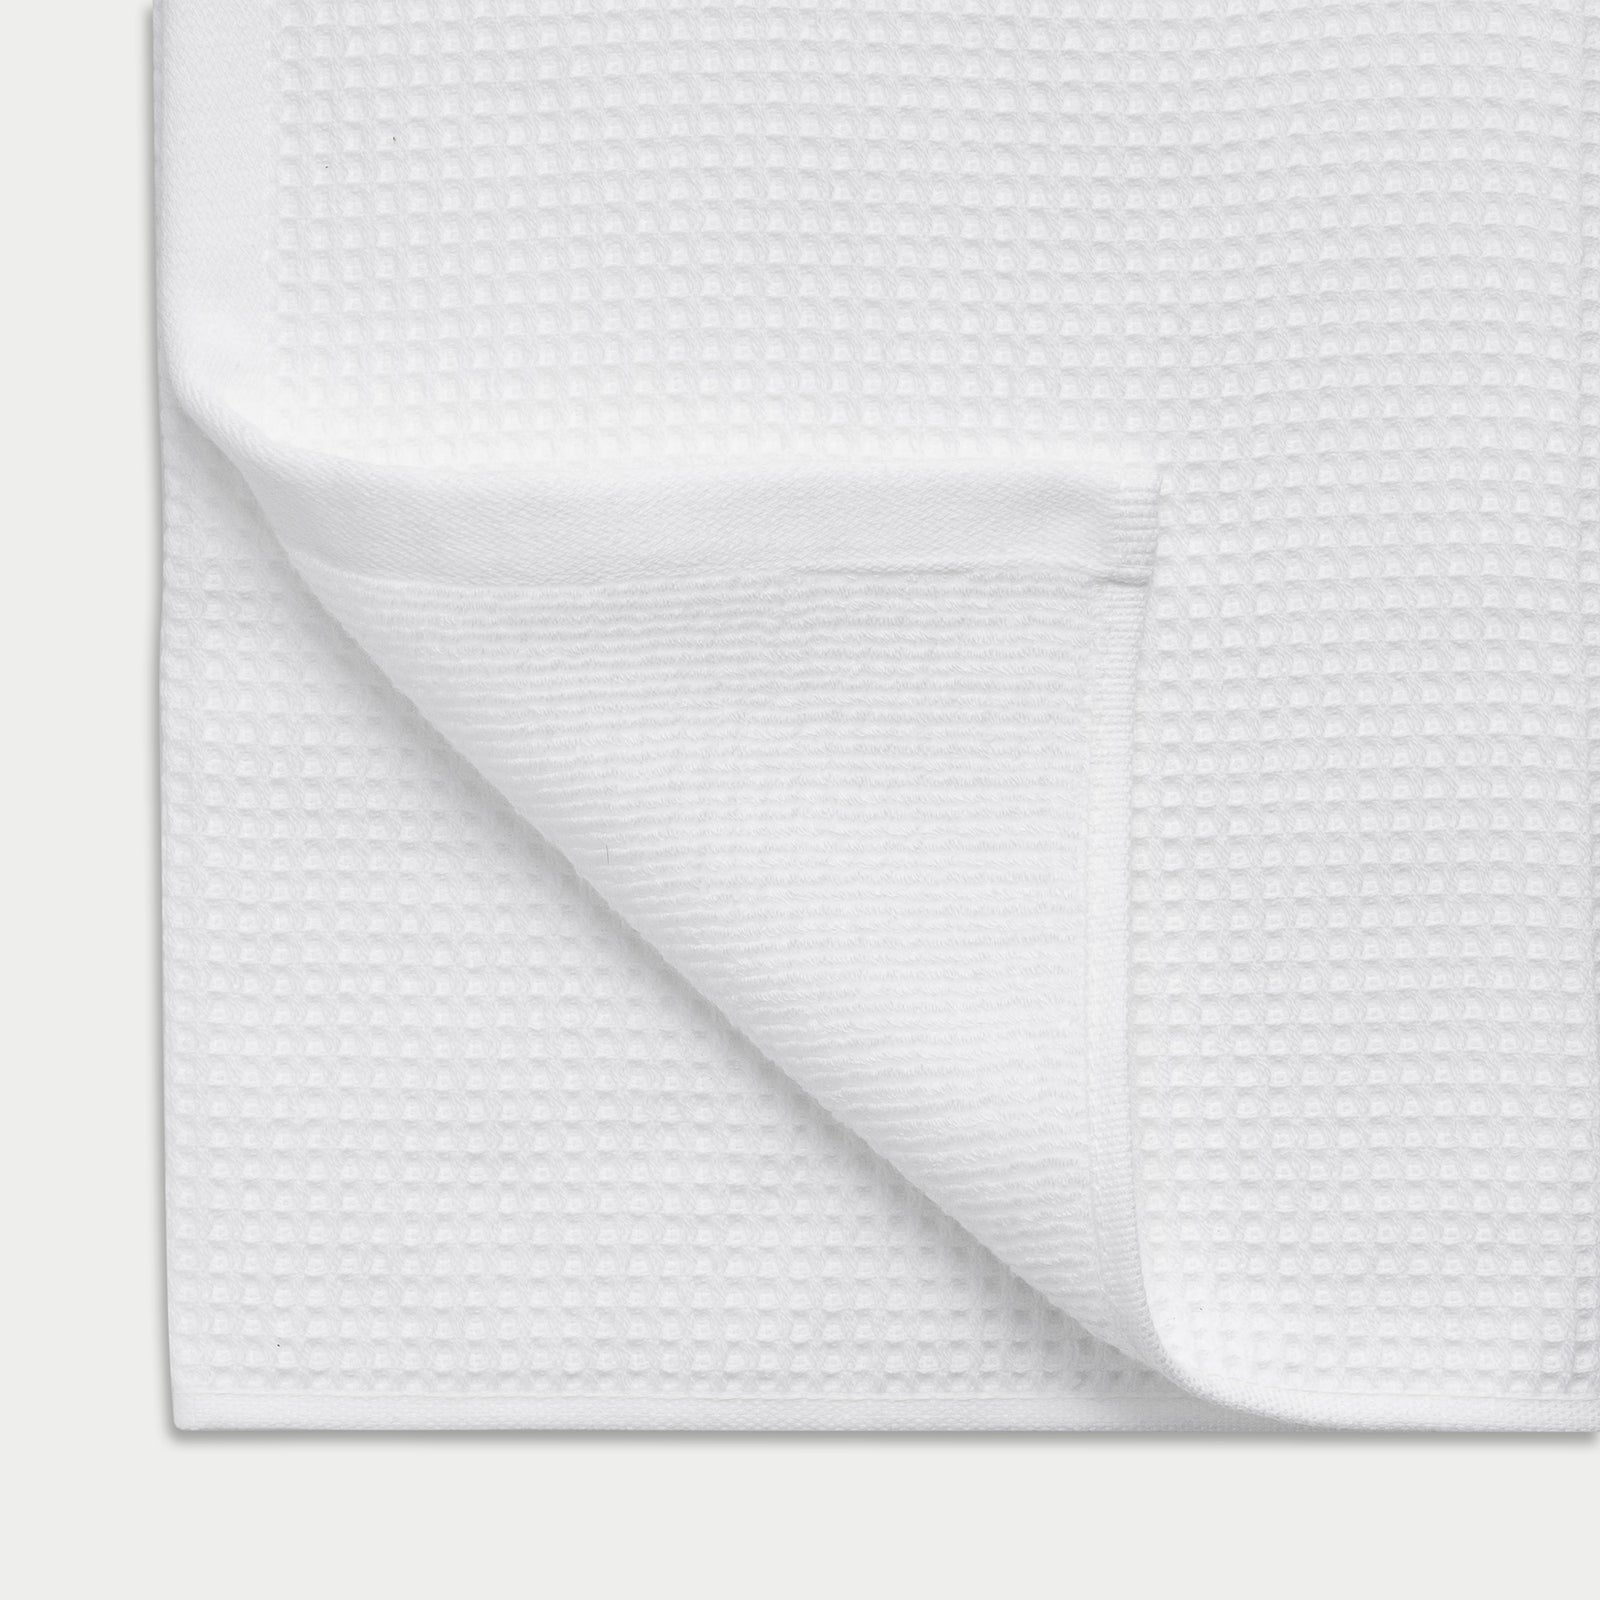 Waffle Bath Towel in the color White. Photo of Waffle Bath Towel taken close up showing the corner of the towel 